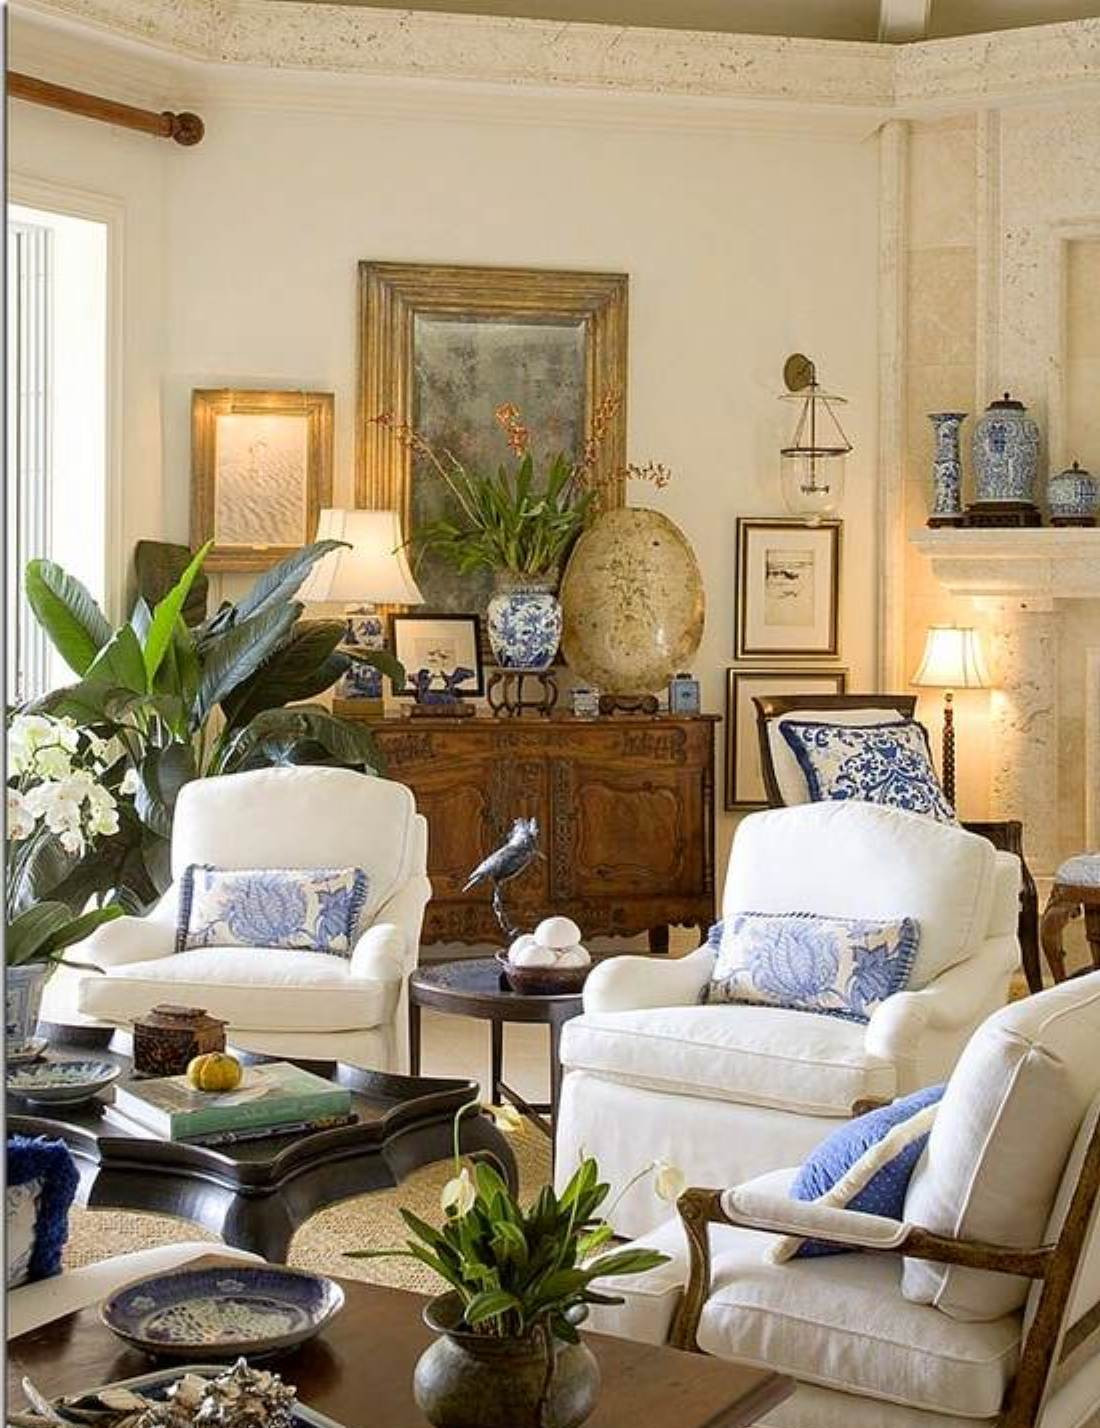 Classic Living Room Ideas
 Tips For Designing Traditional Living Room Decor